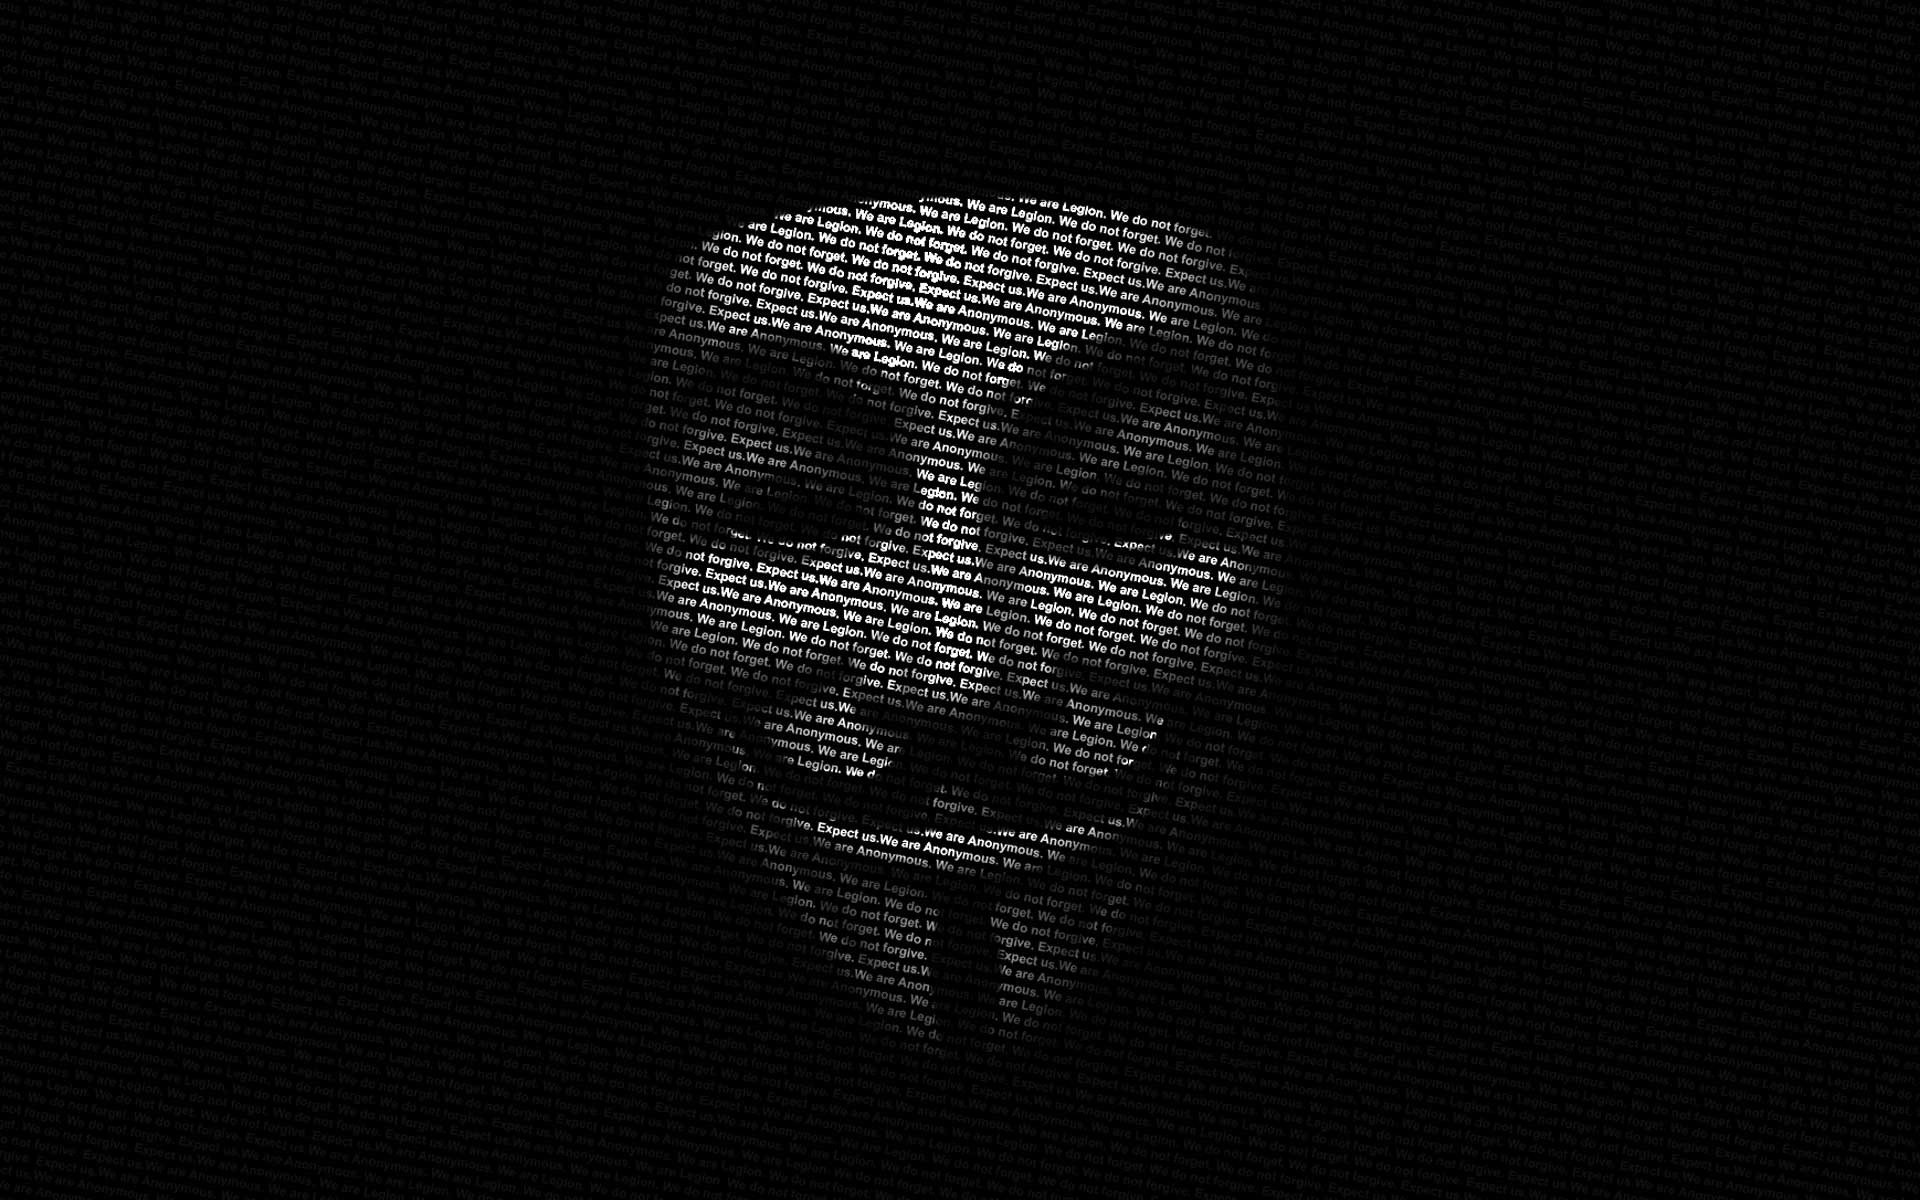 V for Vendetta wallpapers HD  Download Free backgrounds